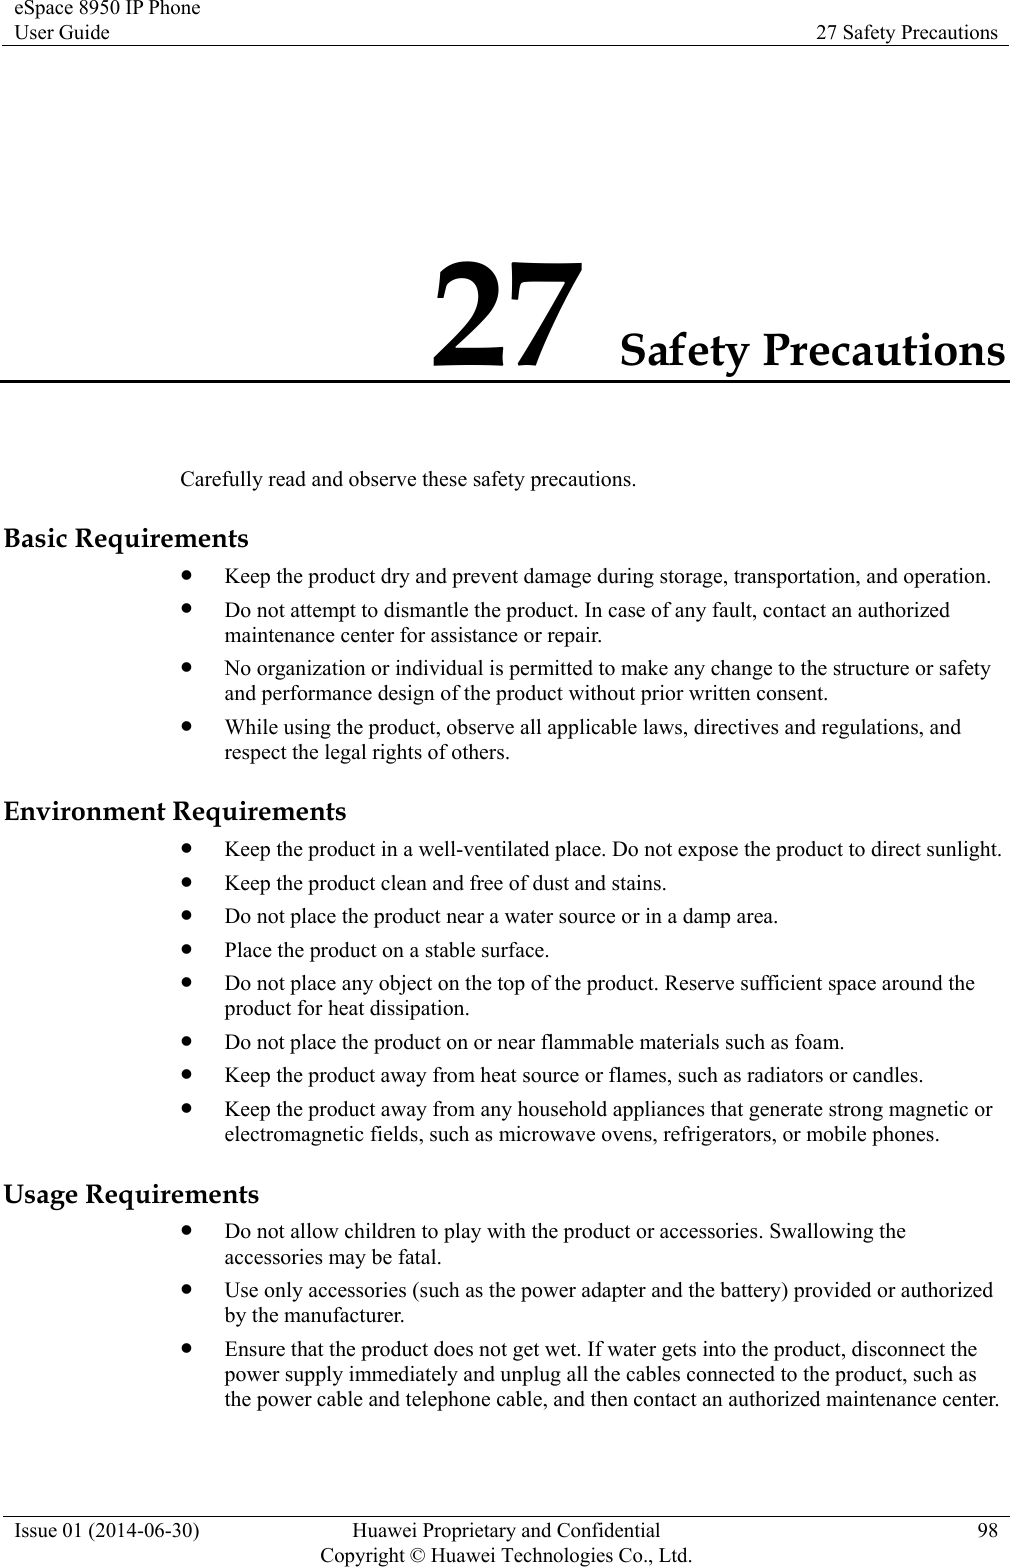 eSpace 8950 IP Phone User Guide  27 Safety Precautions Issue 01 (2014-06-30)  Huawei Proprietary and Confidential       Copyright © Huawei Technologies Co., Ltd.98 27 Safety Precautions Carefully read and observe these safety precautions. Basic Requirements  Keep the product dry and prevent damage during storage, transportation, and operation.  Do not attempt to dismantle the product. In case of any fault, contact an authorized maintenance center for assistance or repair.  No organization or individual is permitted to make any change to the structure or safety and performance design of the product without prior written consent.  While using the product, observe all applicable laws, directives and regulations, and respect the legal rights of others. Environment Requirements  Keep the product in a well-ventilated place. Do not expose the product to direct sunlight.  Keep the product clean and free of dust and stains.  Do not place the product near a water source or in a damp area.  Place the product on a stable surface.  Do not place any object on the top of the product. Reserve sufficient space around the product for heat dissipation.  Do not place the product on or near flammable materials such as foam.  Keep the product away from heat source or flames, such as radiators or candles.  Keep the product away from any household appliances that generate strong magnetic or electromagnetic fields, such as microwave ovens, refrigerators, or mobile phones. Usage Requirements  Do not allow children to play with the product or accessories. Swallowing the accessories may be fatal.  Use only accessories (such as the power adapter and the battery) provided or authorized by the manufacturer.  Ensure that the product does not get wet. If water gets into the product, disconnect the power supply immediately and unplug all the cables connected to the product, such as the power cable and telephone cable, and then contact an authorized maintenance center. 